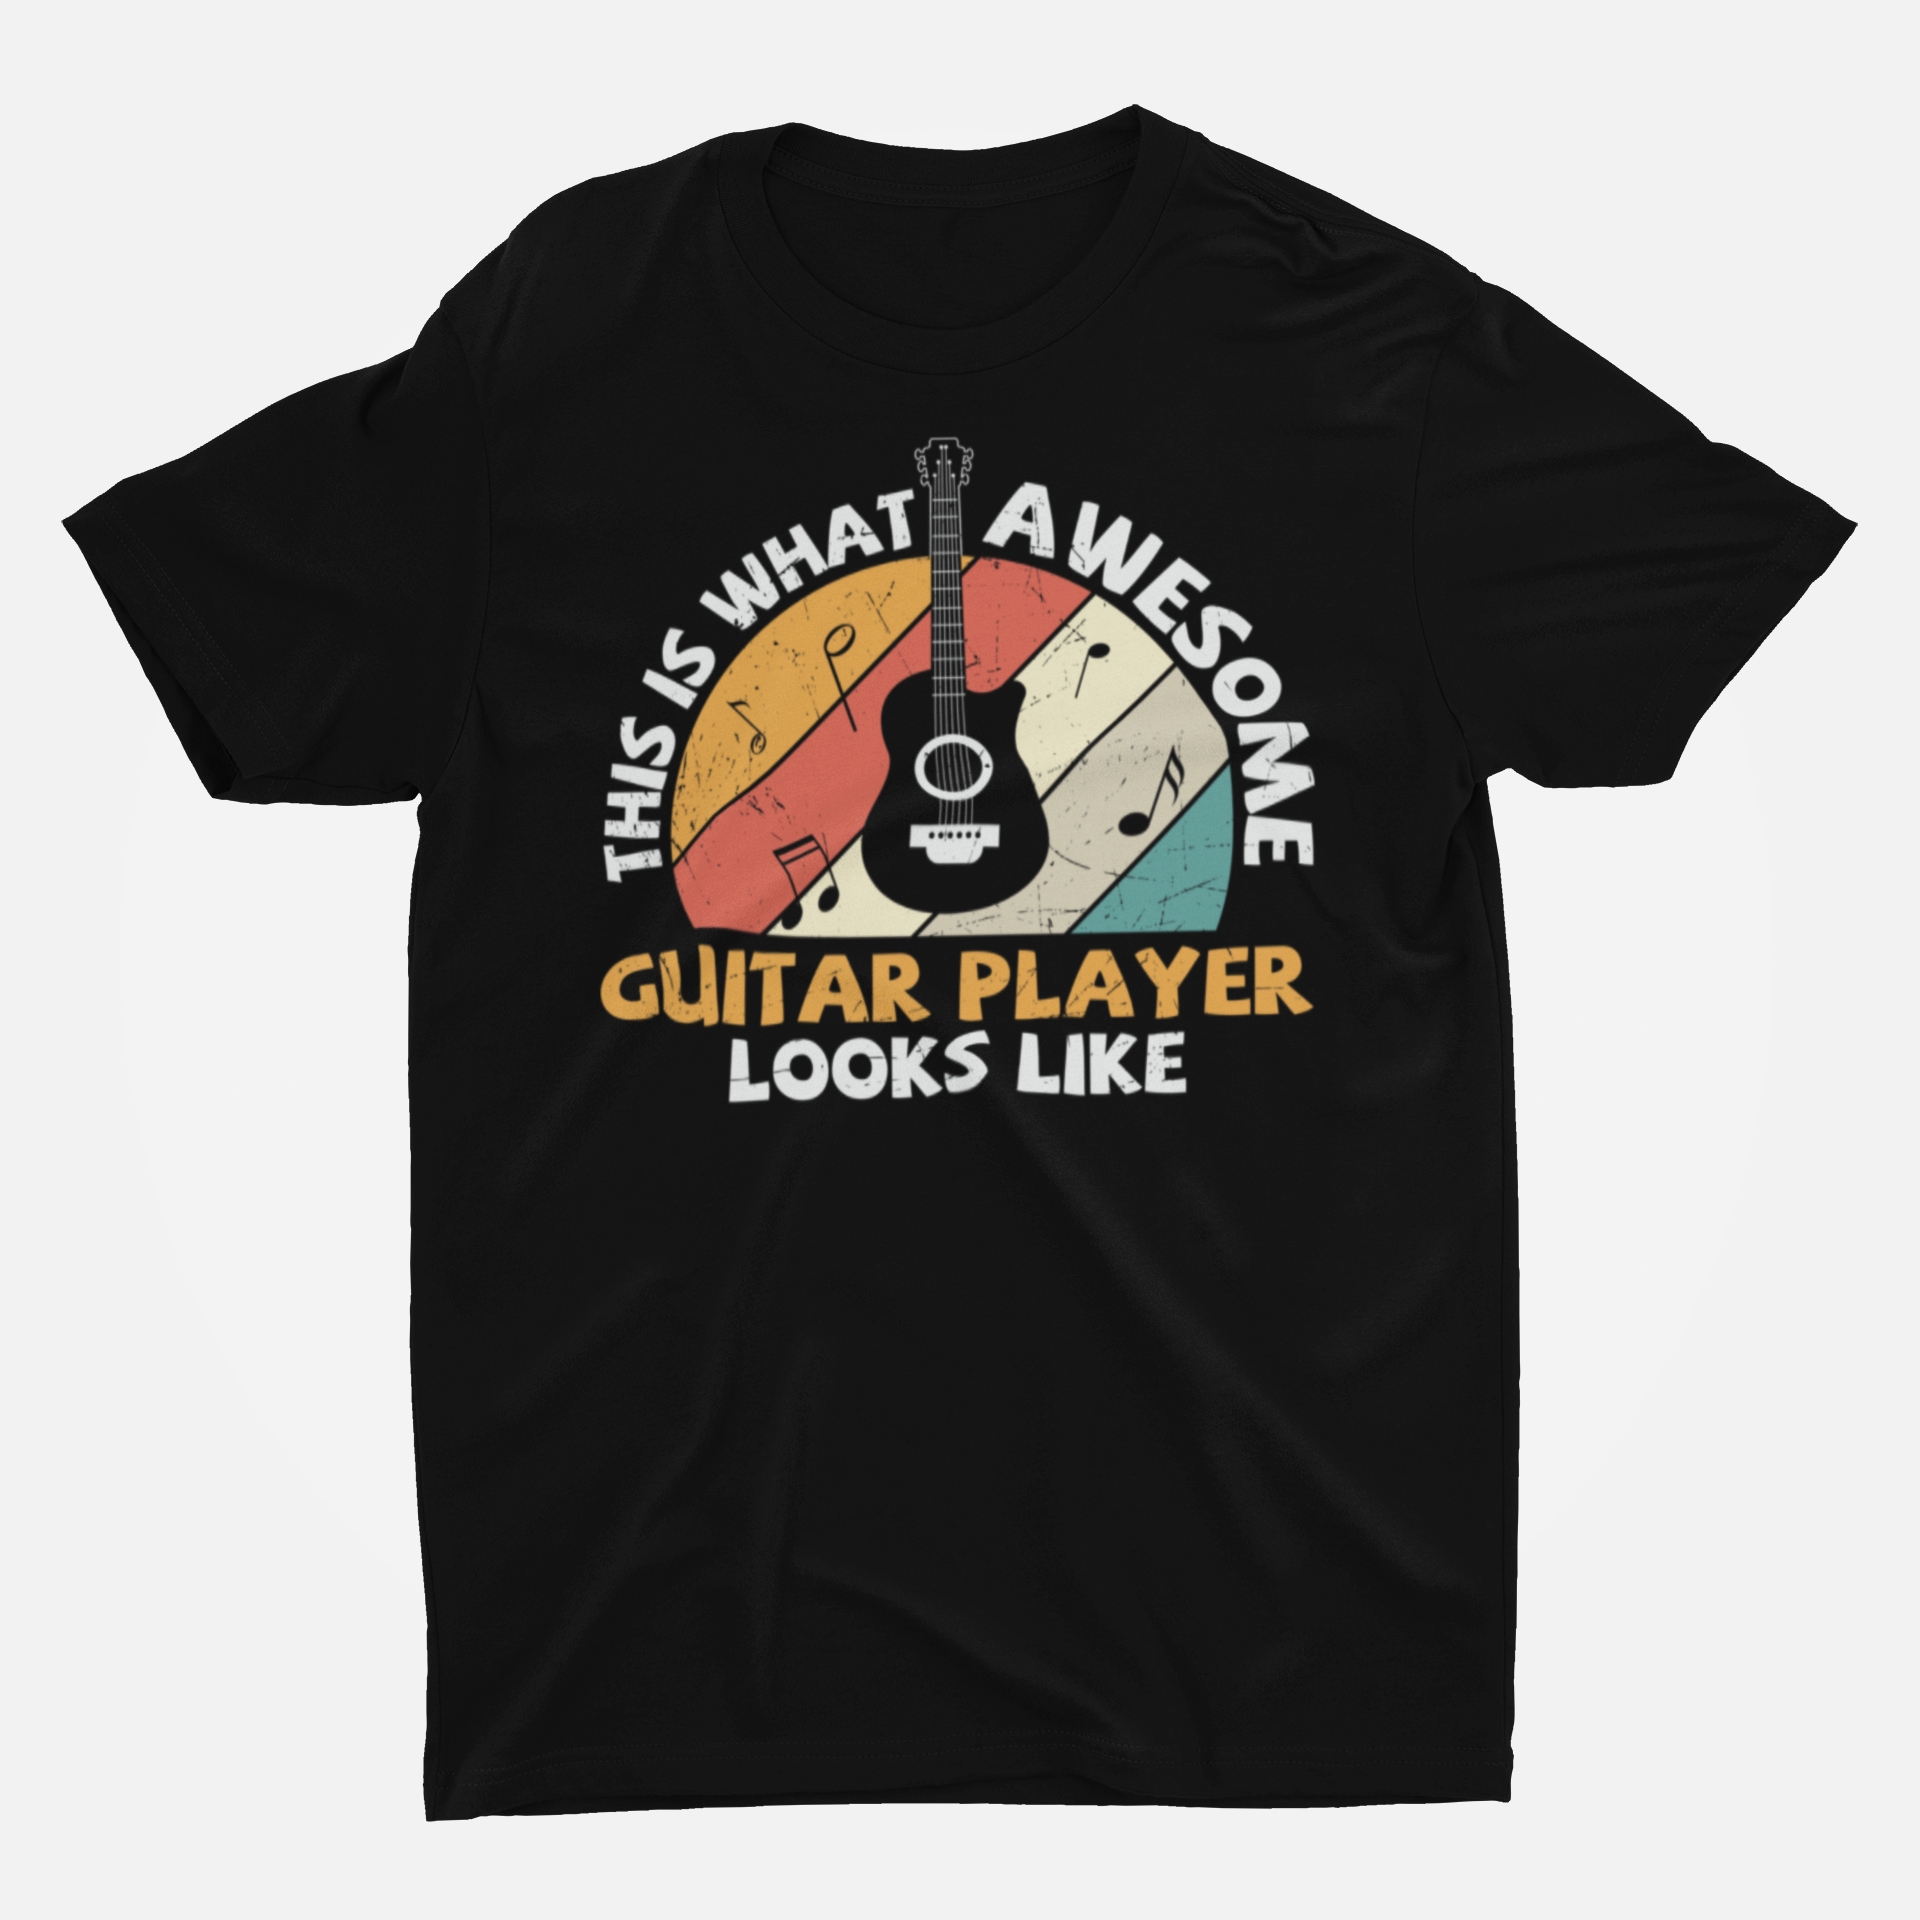 Awesome Guitar Player Black Round Neck T-Shirt for Men